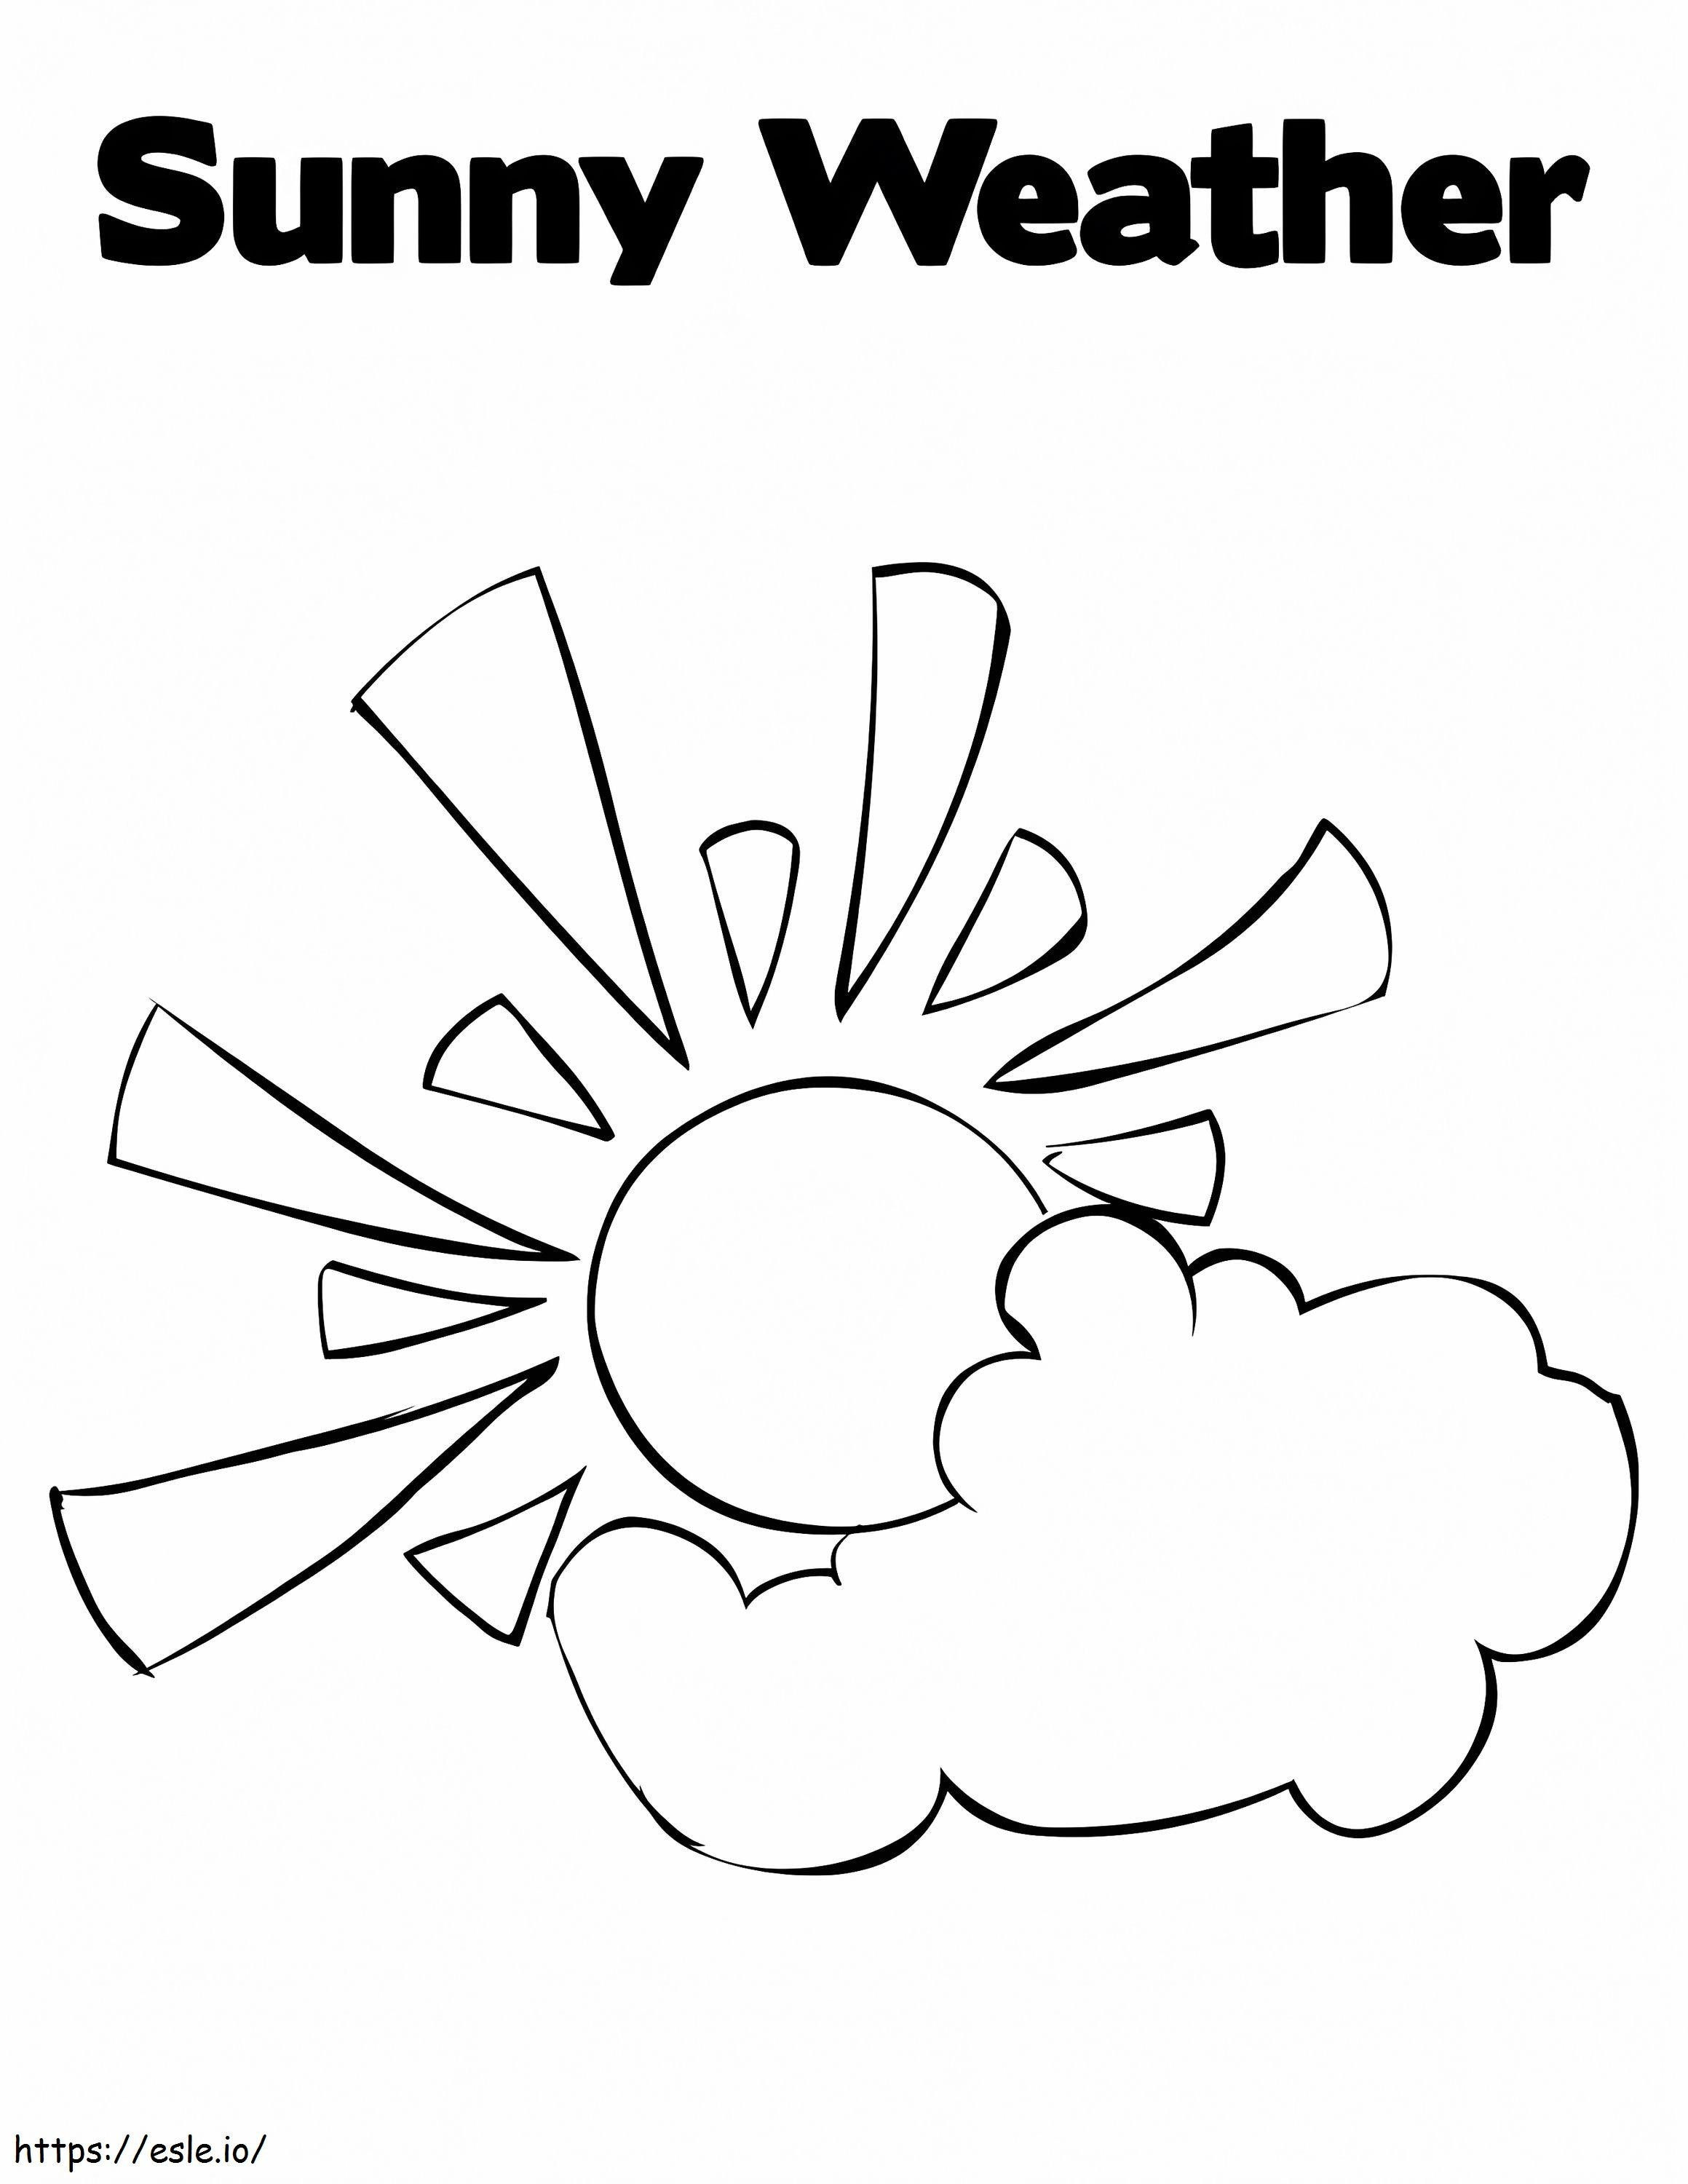 Sunny Weather coloring page